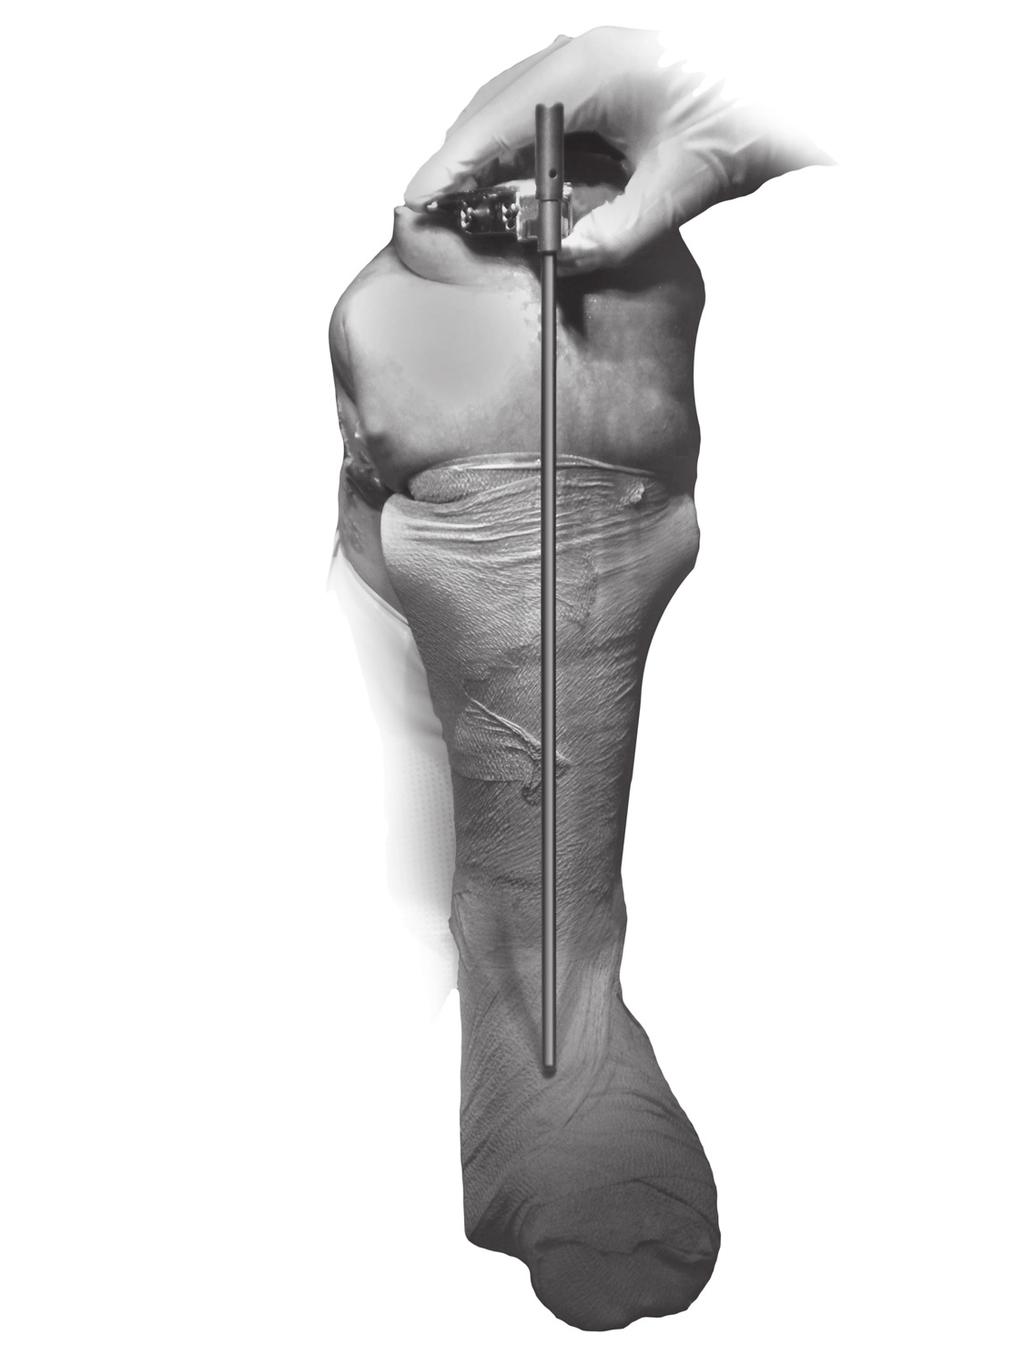 A When fixating the Cut Guide, excessive force from screws can alter the planned location and could influence the amount of varus/valgus in the cut. TECHNIQUE TIP 2.